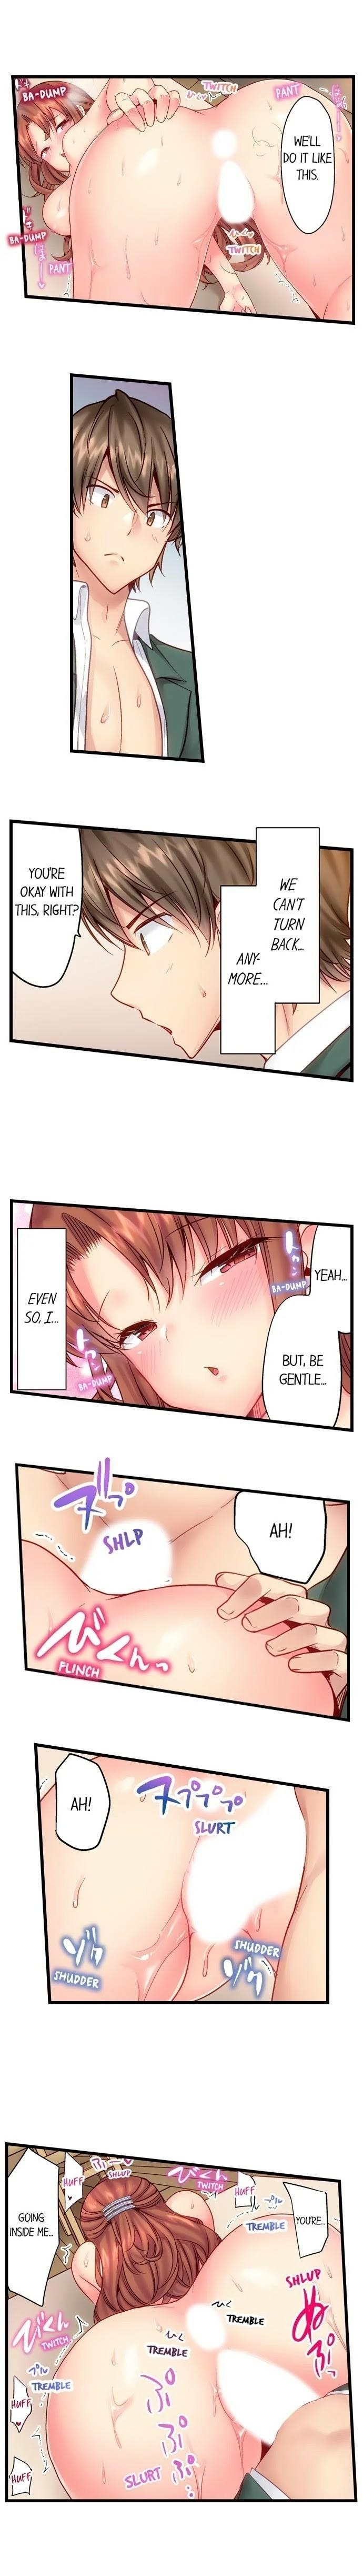 [Yuuki HB] "Hypnotized" Sex with My Brother Ch.21/? [English] [Ongoing] 74